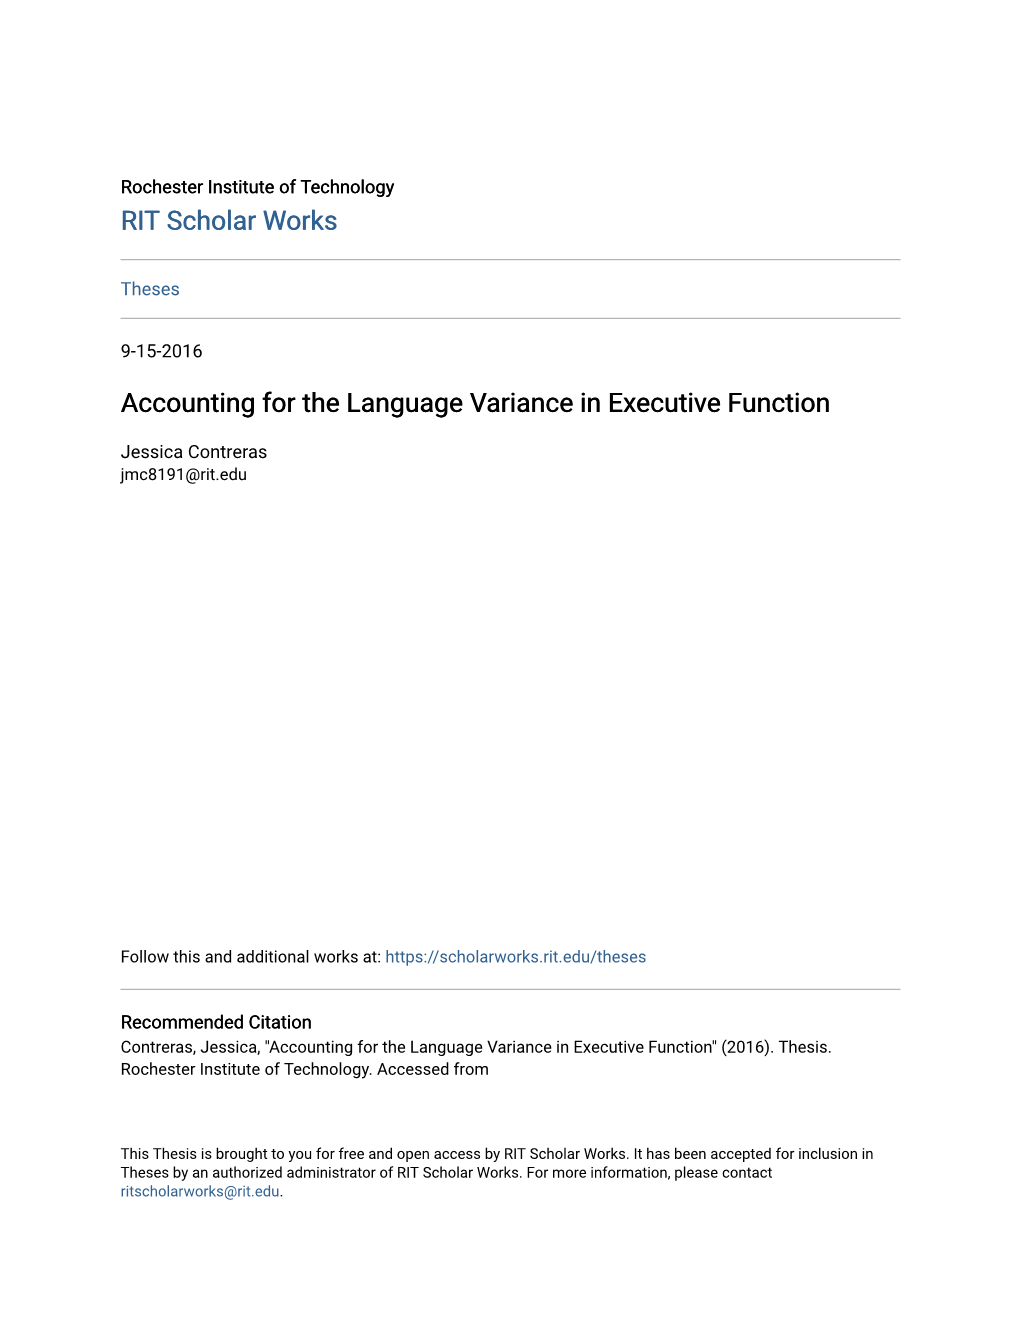 Accounting for the Language Variance in Executive Function